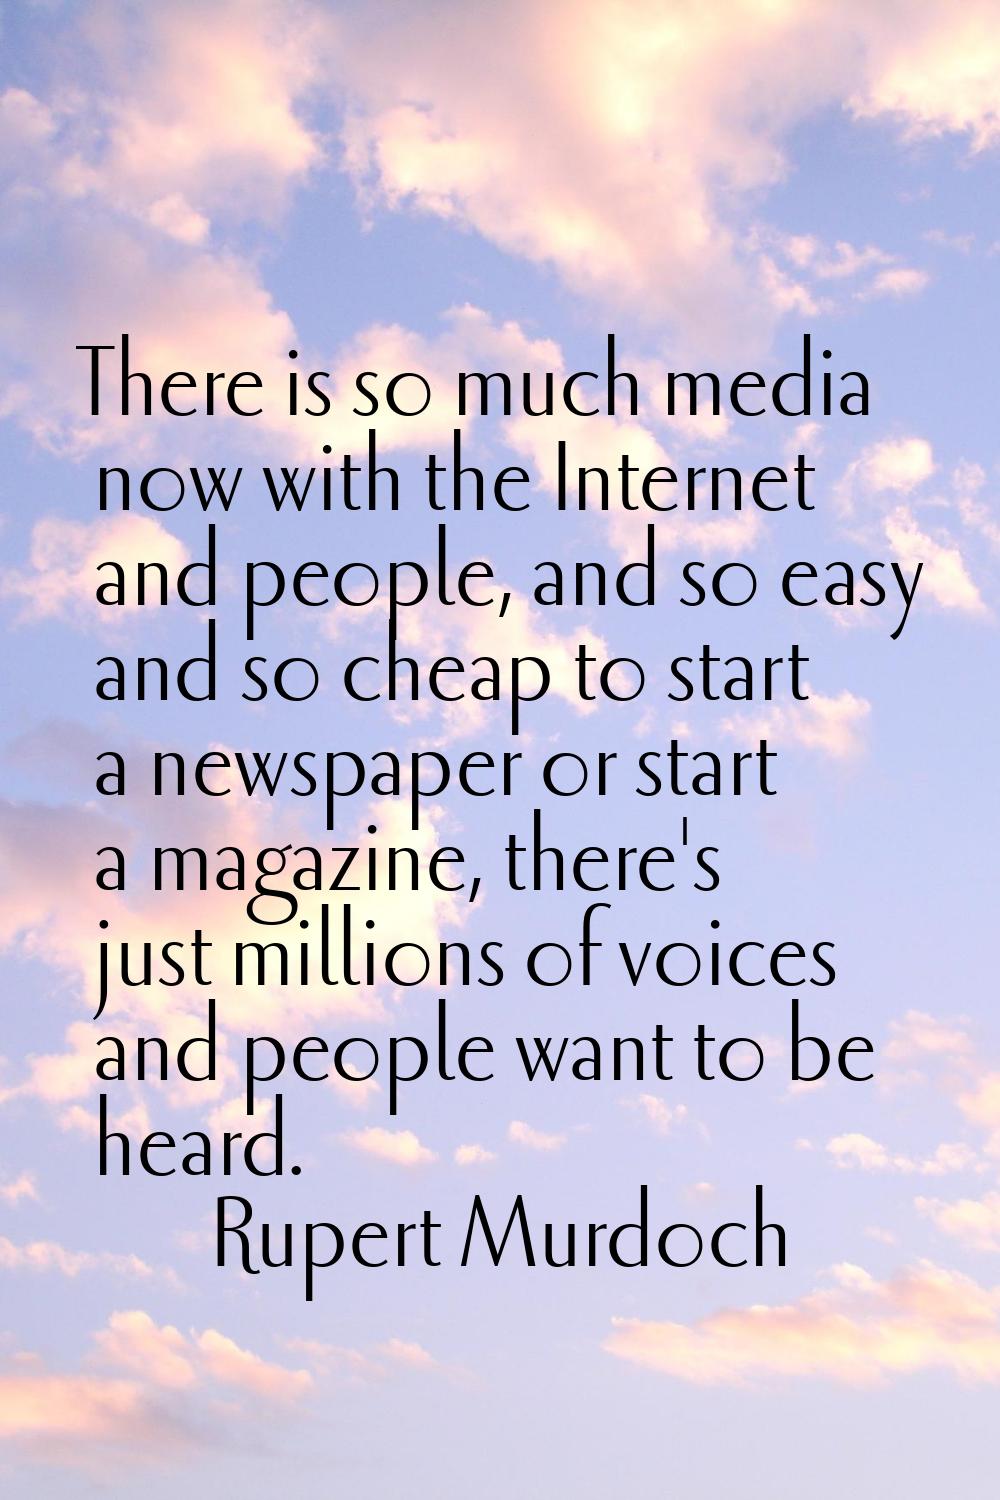 There is so much media now with the Internet and people, and so easy and so cheap to start a newspa